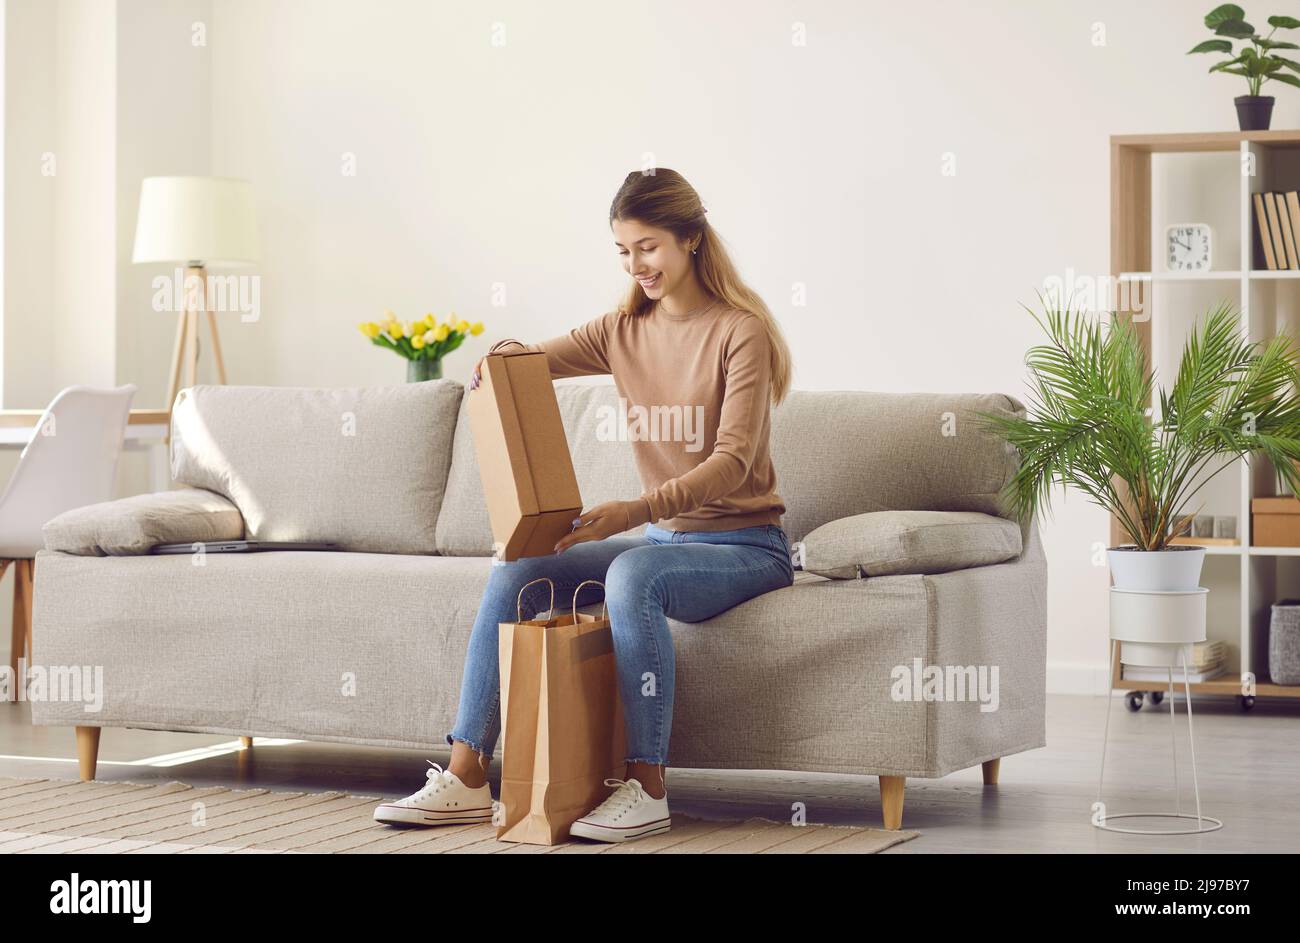 Happy woman who ordered things in online store takes box out of paper delivery bag Stock Photo